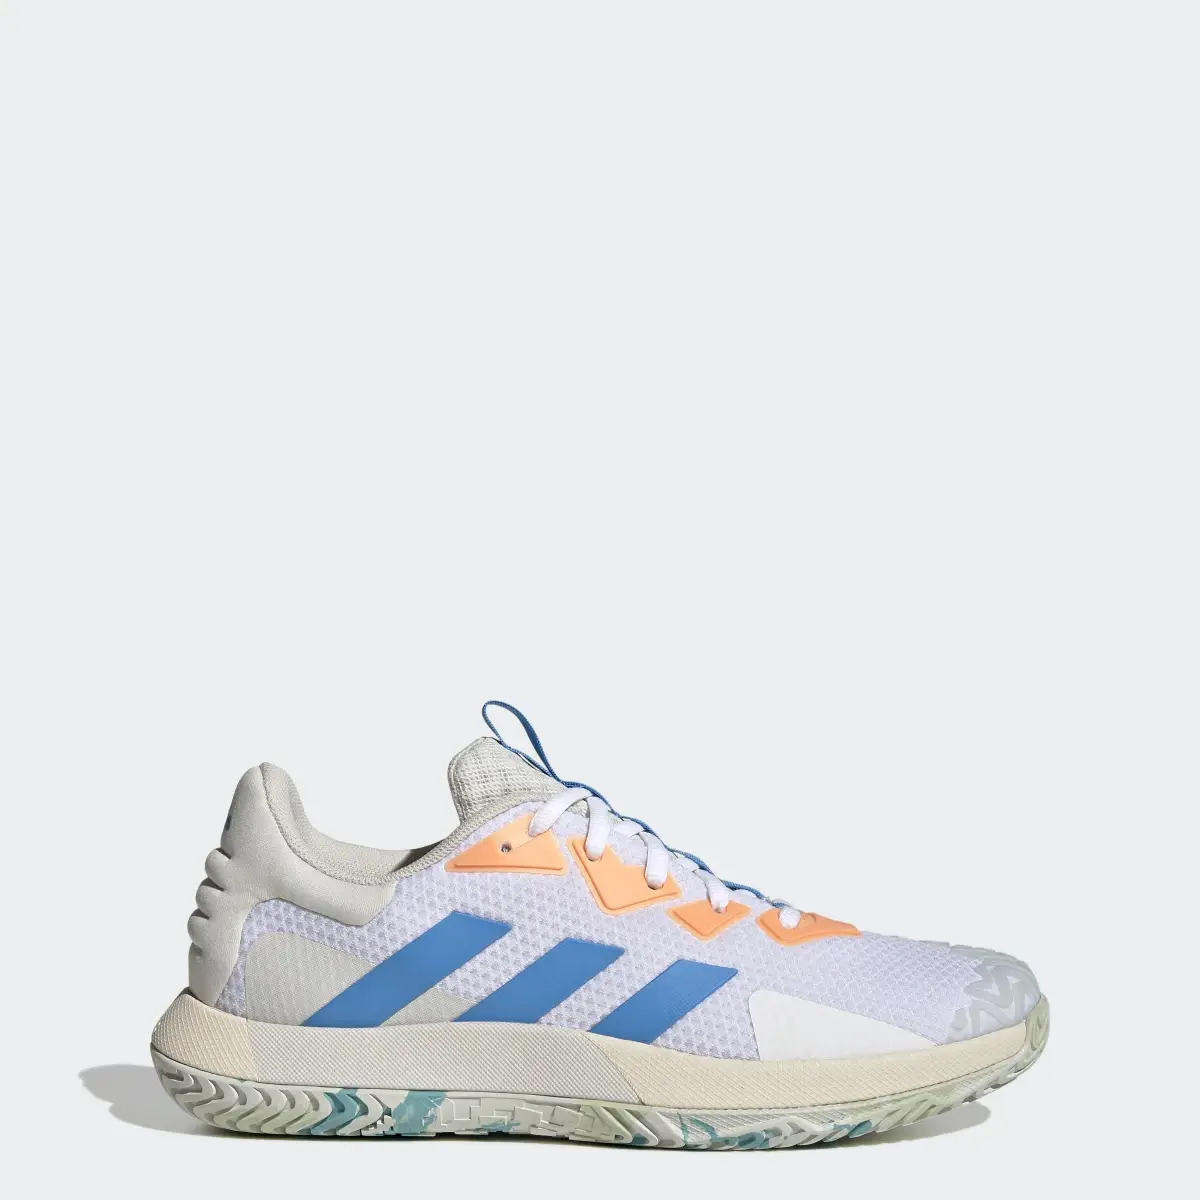 Adidas SoleMatch Control Tennis Shoes. 1